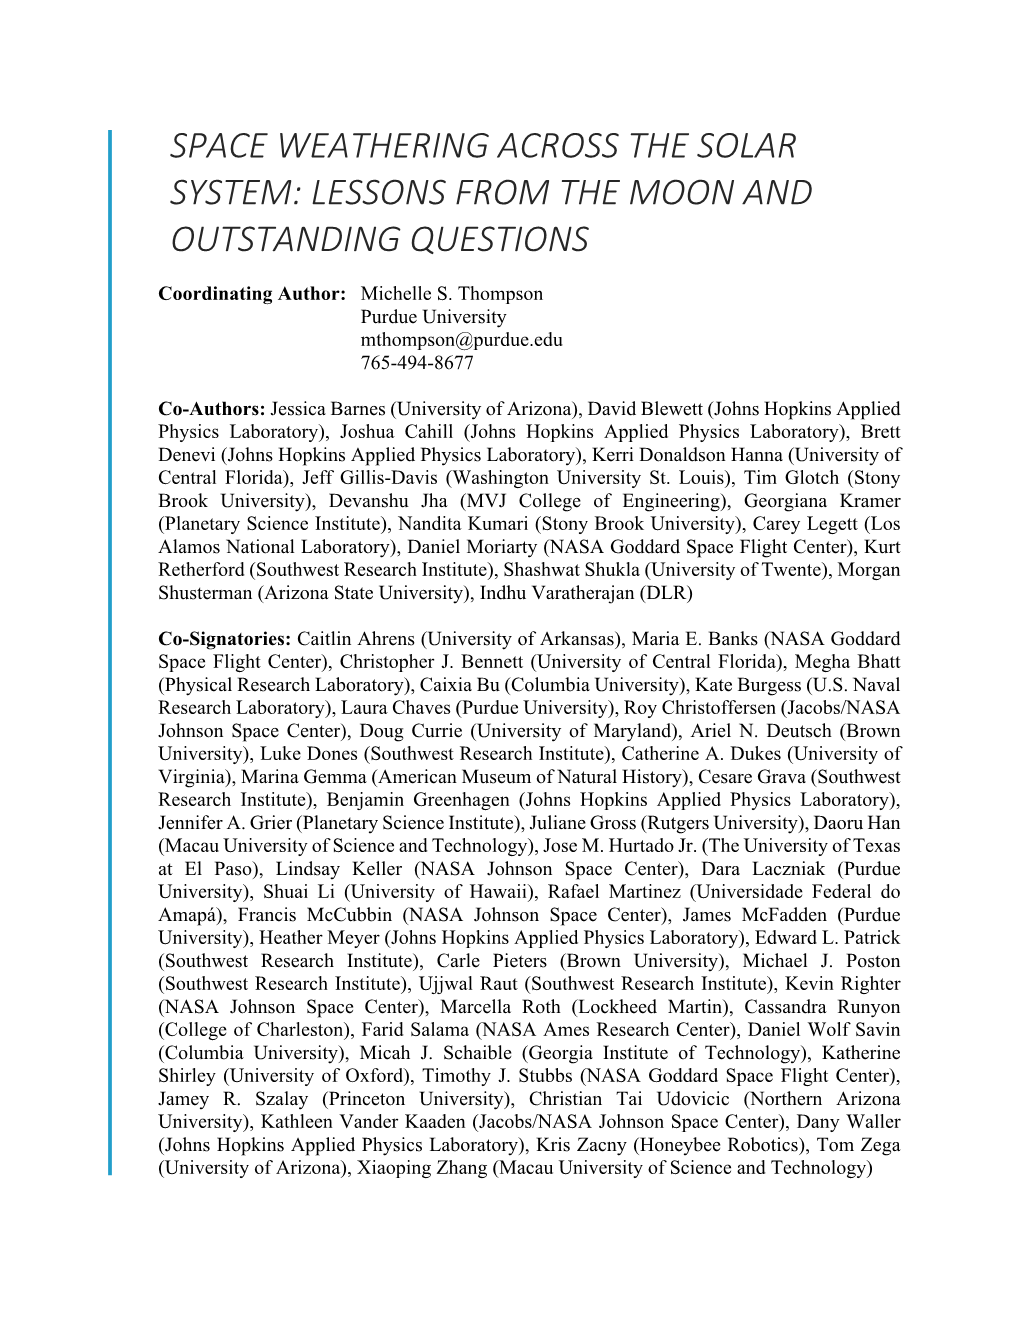 Space Weathering Across the Solar System: Lessons from the Moon